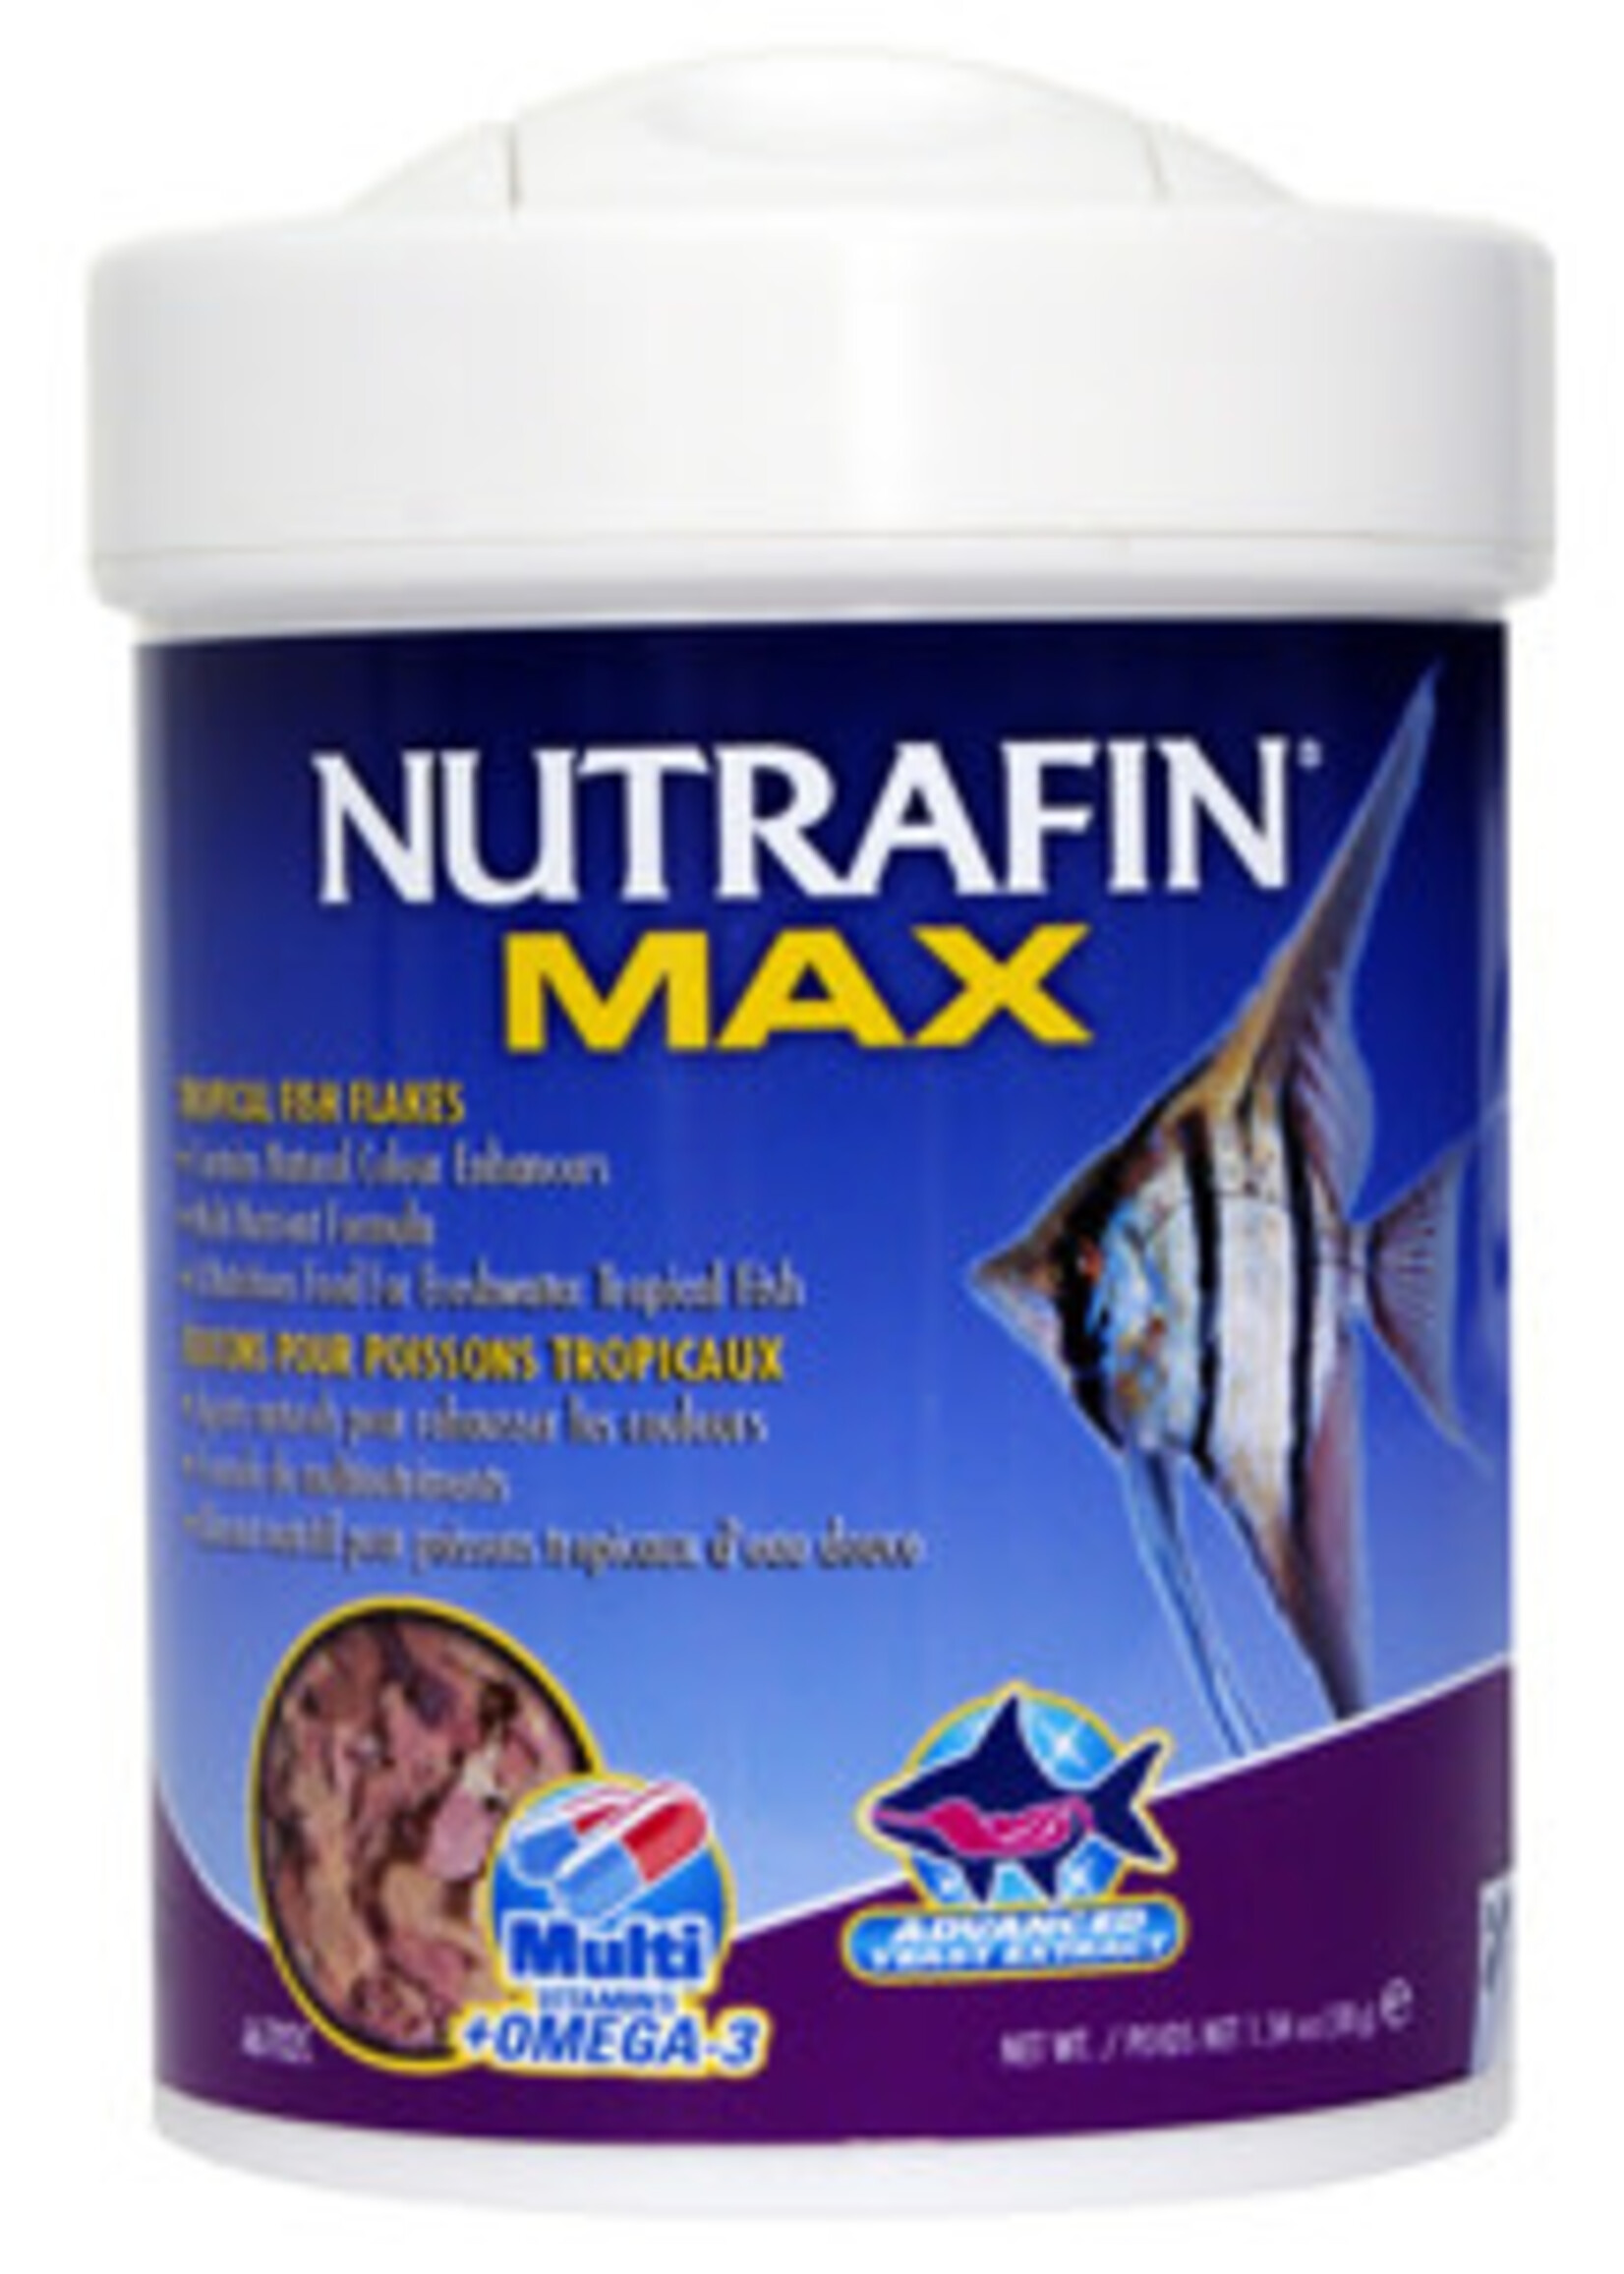 Nutrafin Nutrafin Max Tropical Fish Flakes 38 g (1.34 oz)